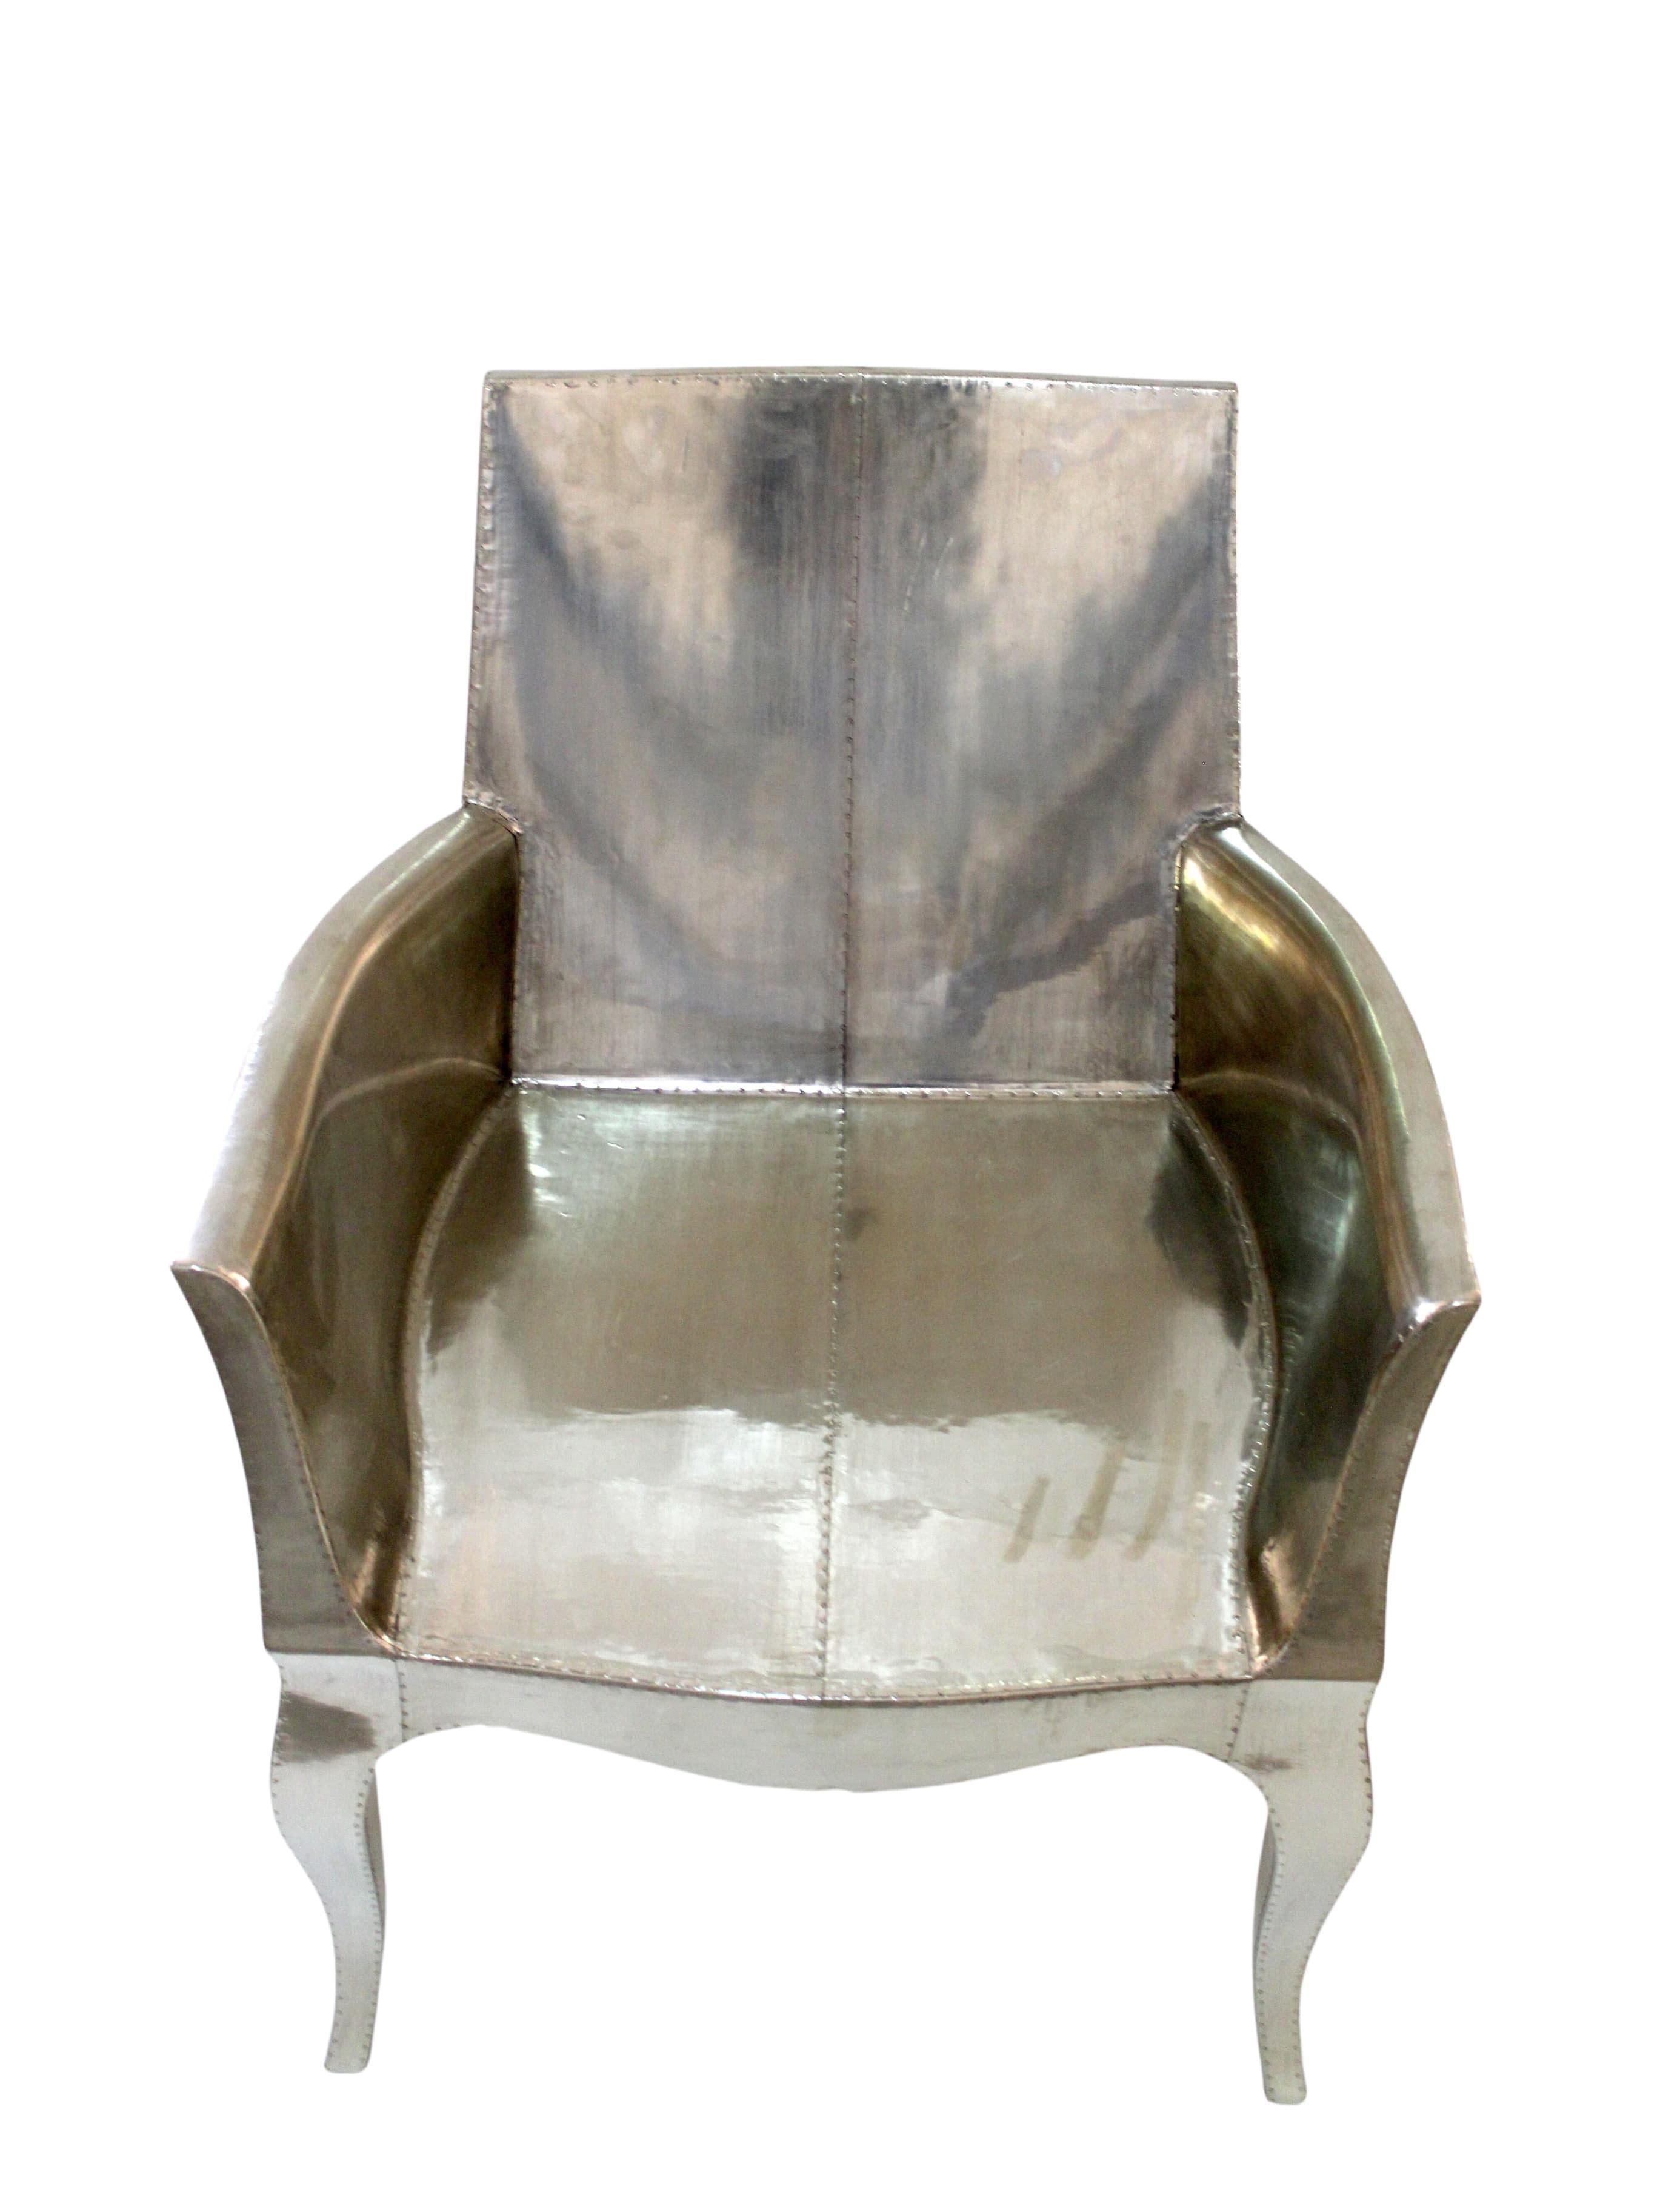 Bronzed Art Deco Accent Chair Pair Designed by Paul Mathieu for Stephanie Odegard For Sale